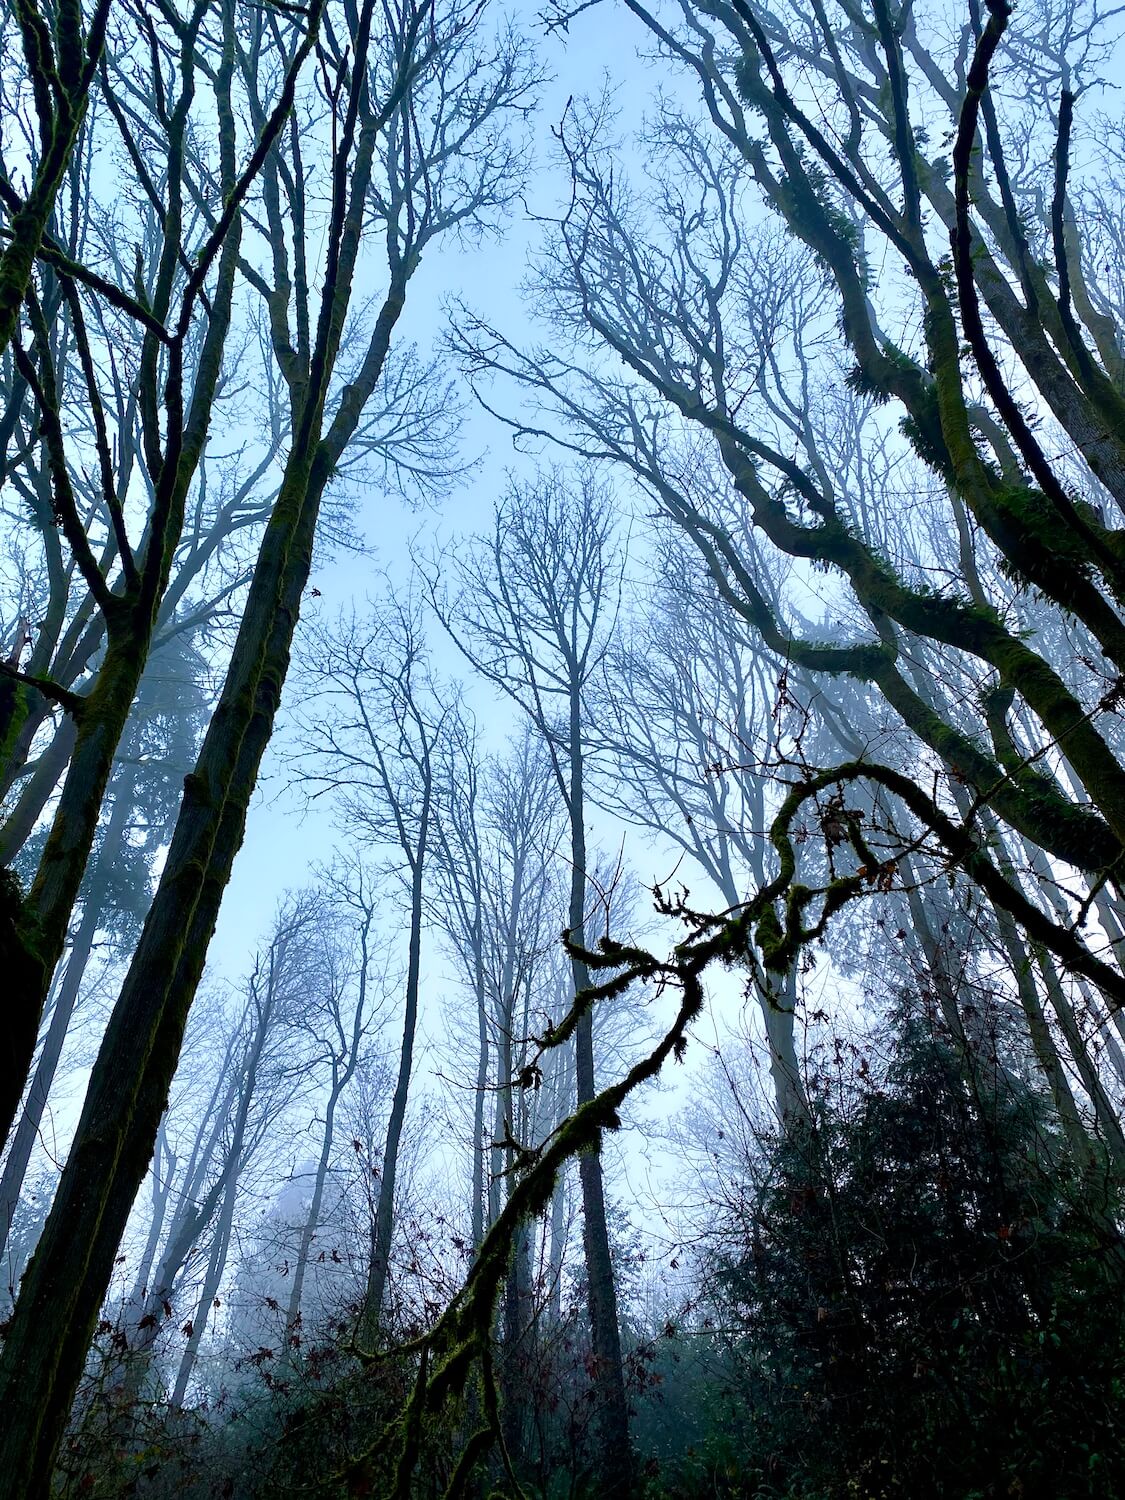 This view of a Winter forest, with bare trees in Ravenna Park in Seattle represents the Hermit in the tarot